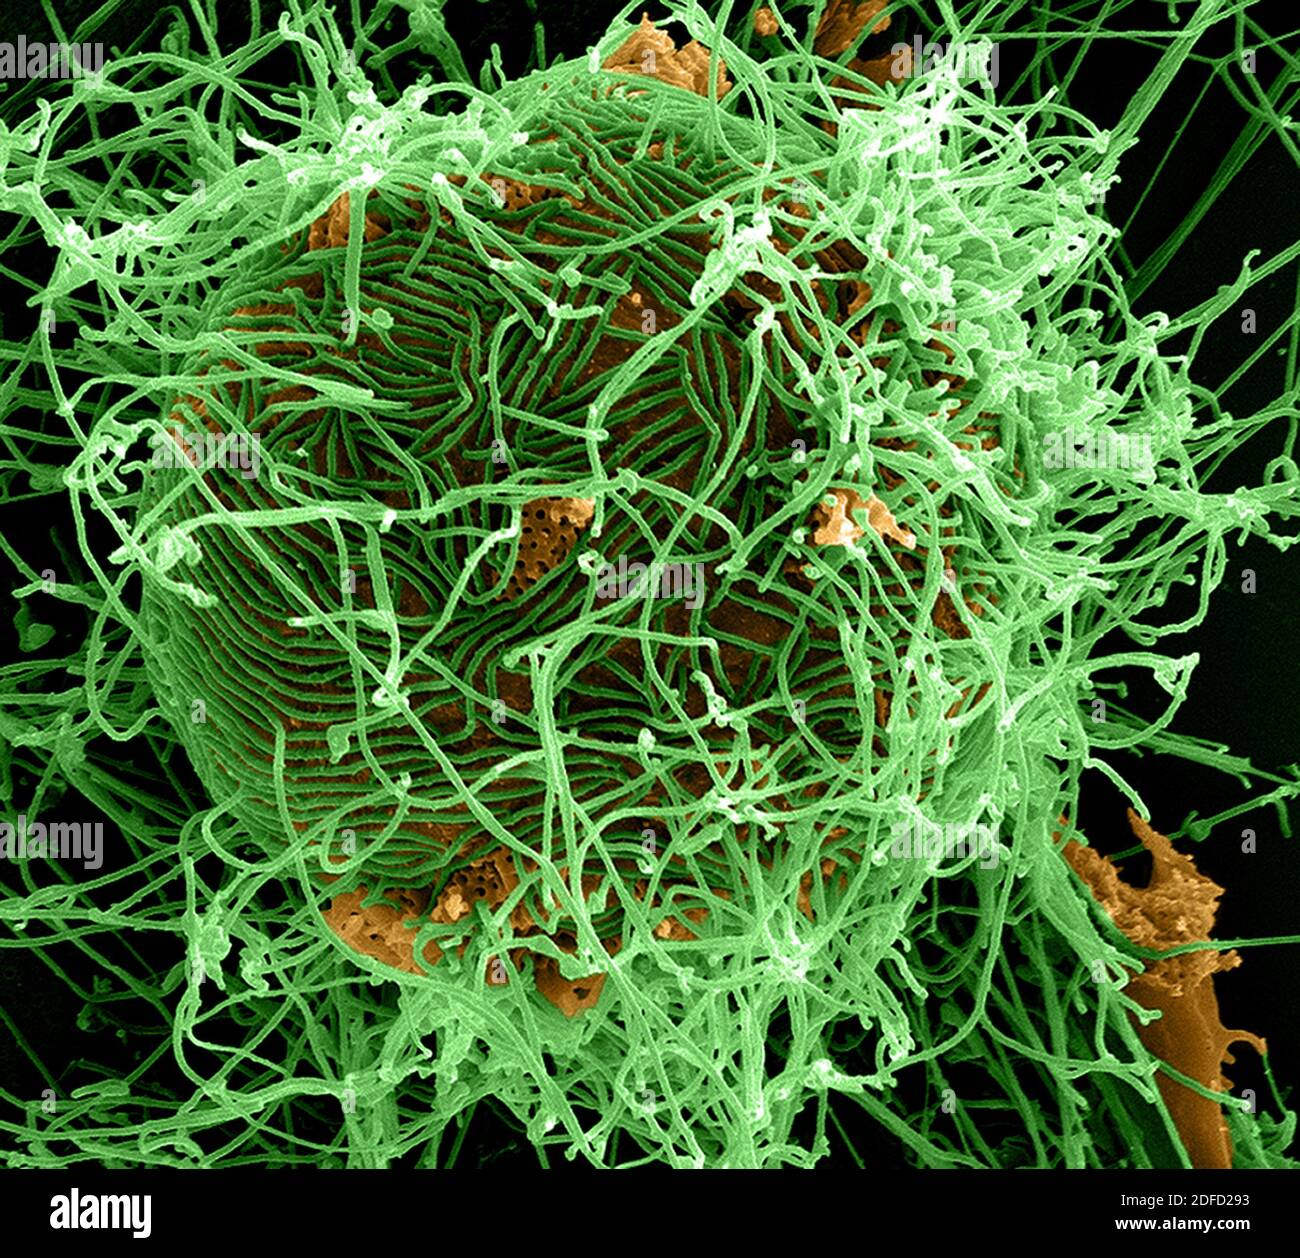 Colorized scanning electron micrograph of filamentous. Ebola virus particles (green) attached and budding from. a chronically infected VERO E6 cell (o Stock Photo